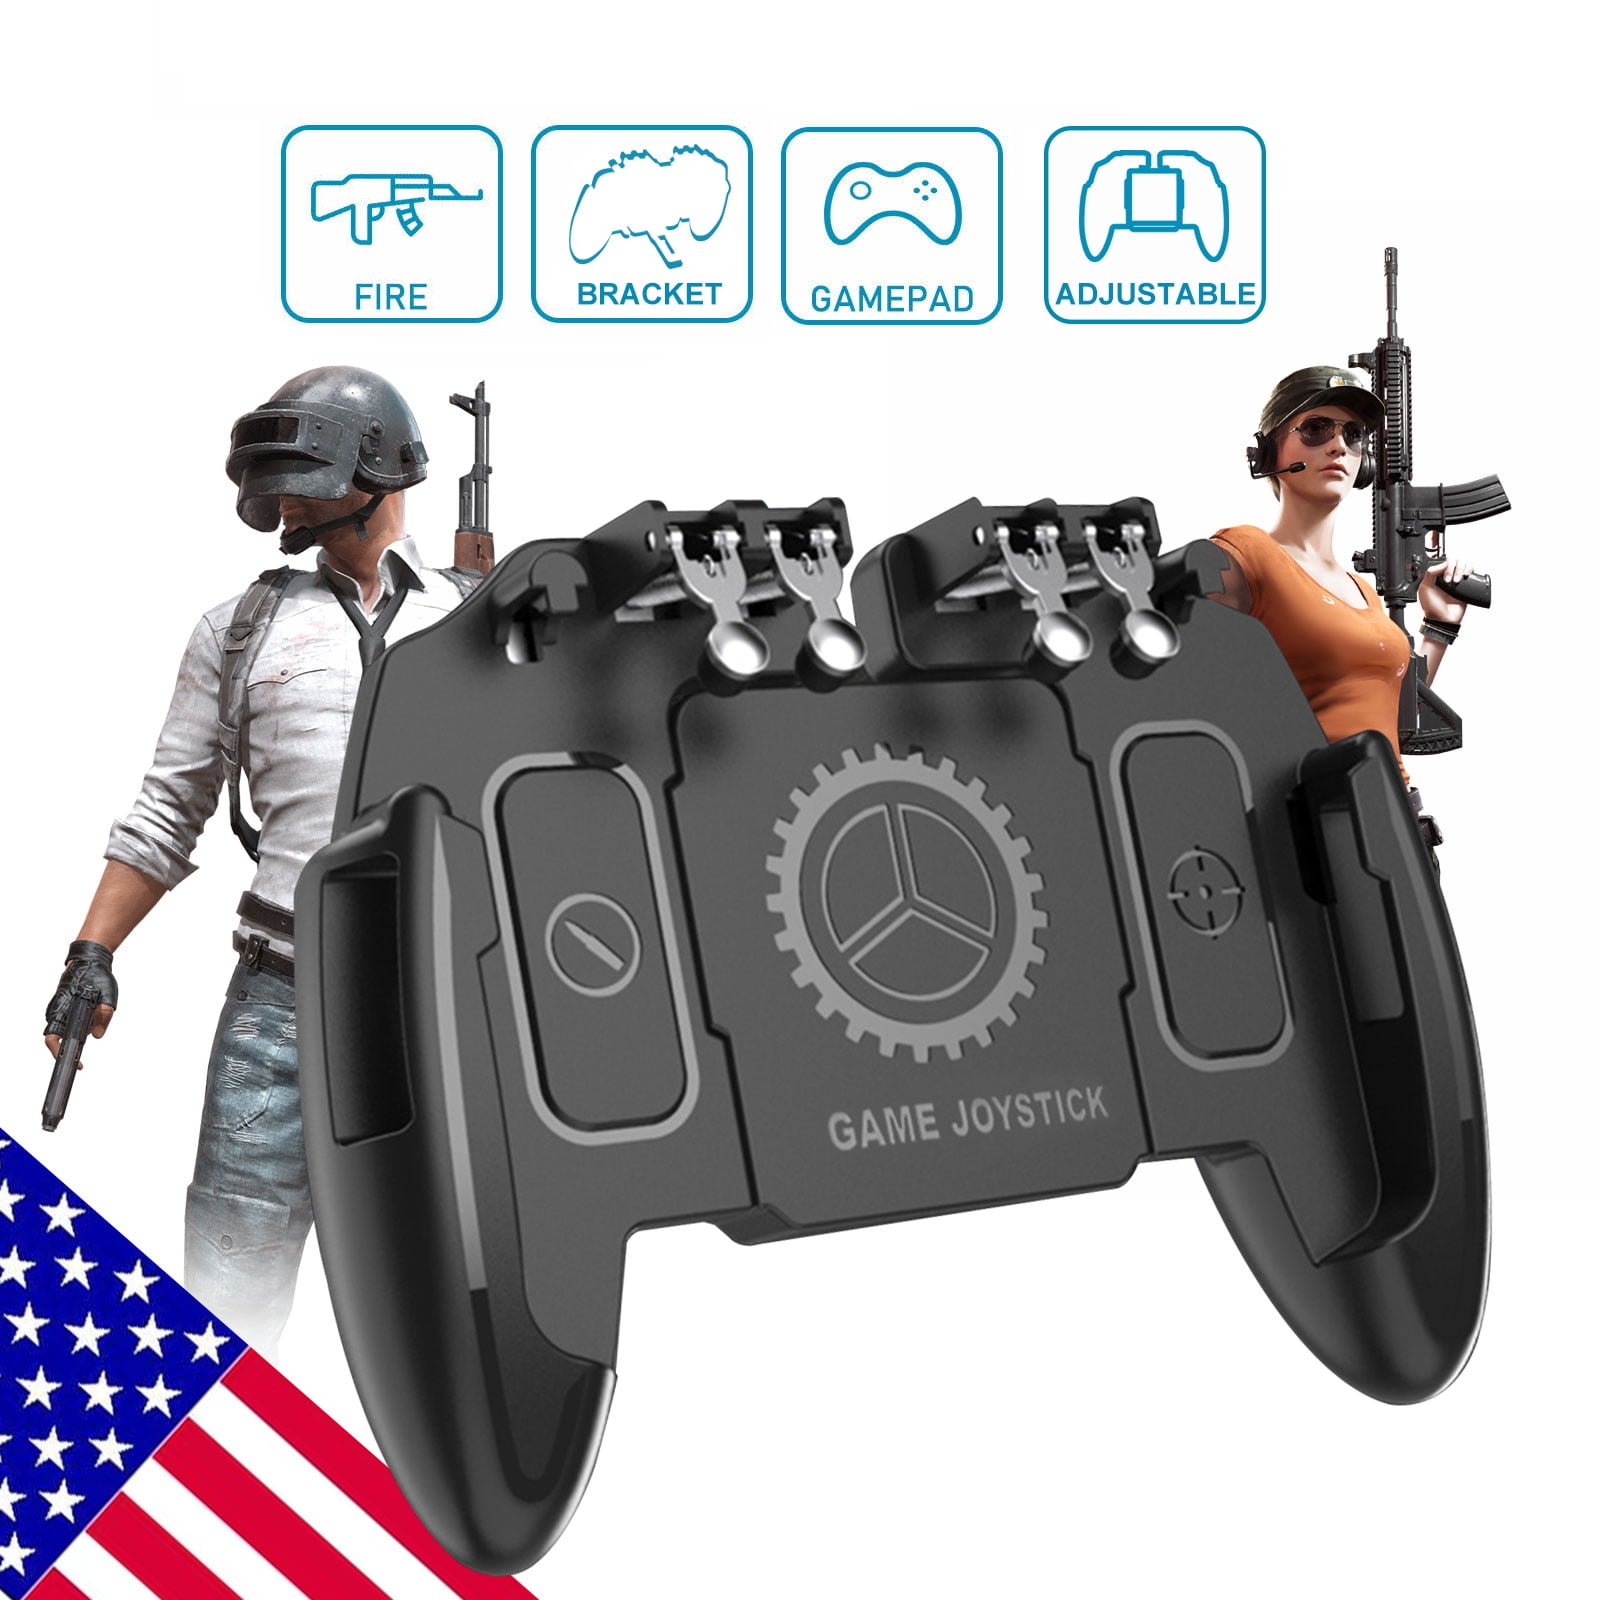 Gamepad Mobile Game Controller for IPad/Tablets Color : Default Six Finger Game Joystick Handle Trigger Aim Button L1R1 L2R2 Shooter Gamepad for PUBG/Fornite/Knives Out/Call of Duty